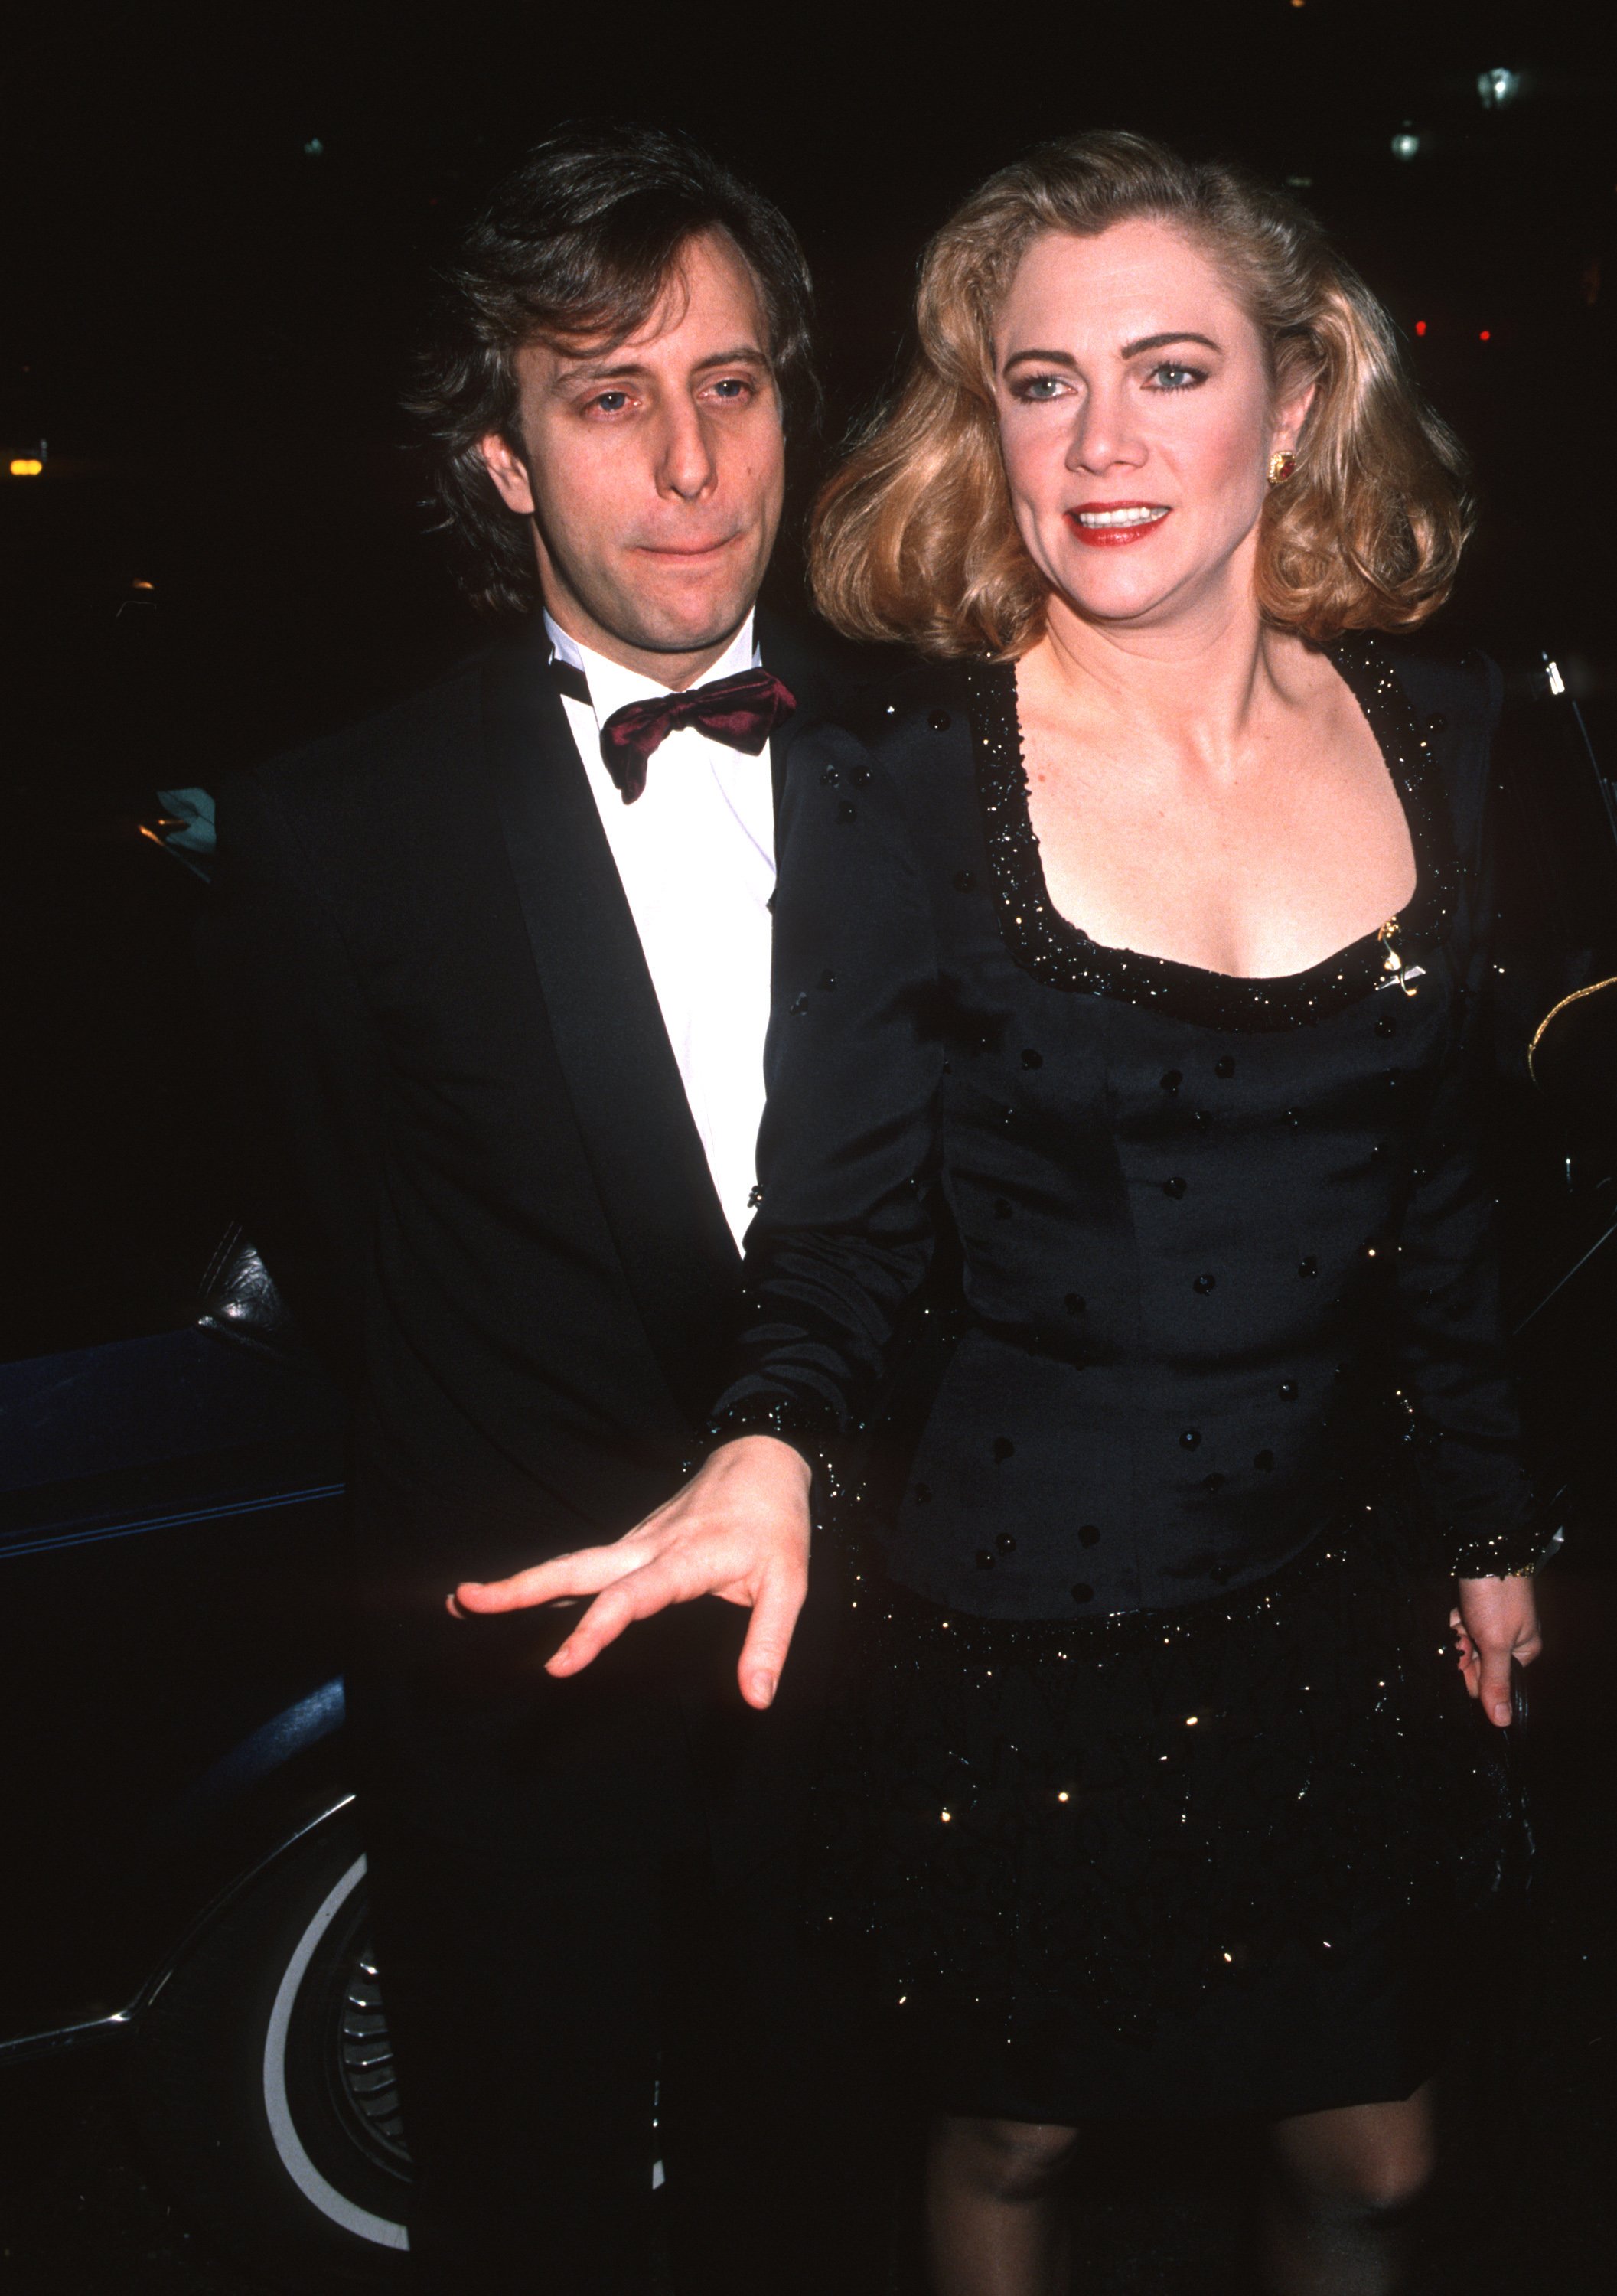 Real estate investor, Jay Weiss and Kathleen Turner during "Cat on a Hot Tin Roof" premiere at B. Smiths restaurant in New York City, New York. / Source: Getty Images